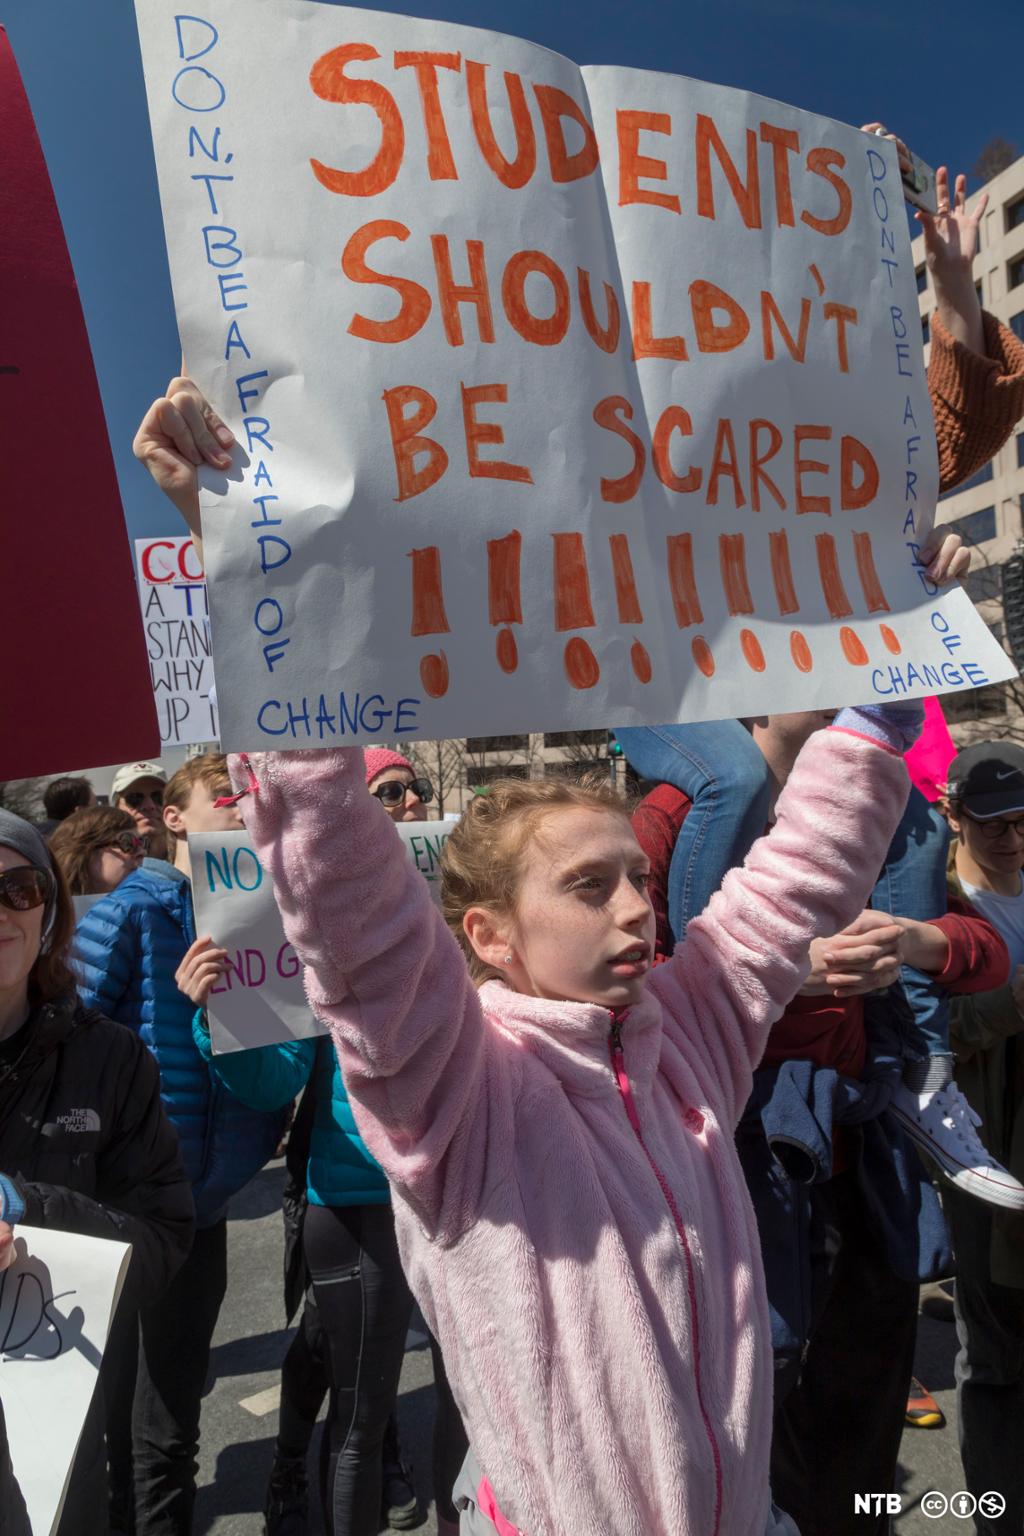 A young girl is participating in the March for Our Lives demonstration in Washington DC in 2018. She's holding a poster over her head saying "Students shouldn't be scared". 